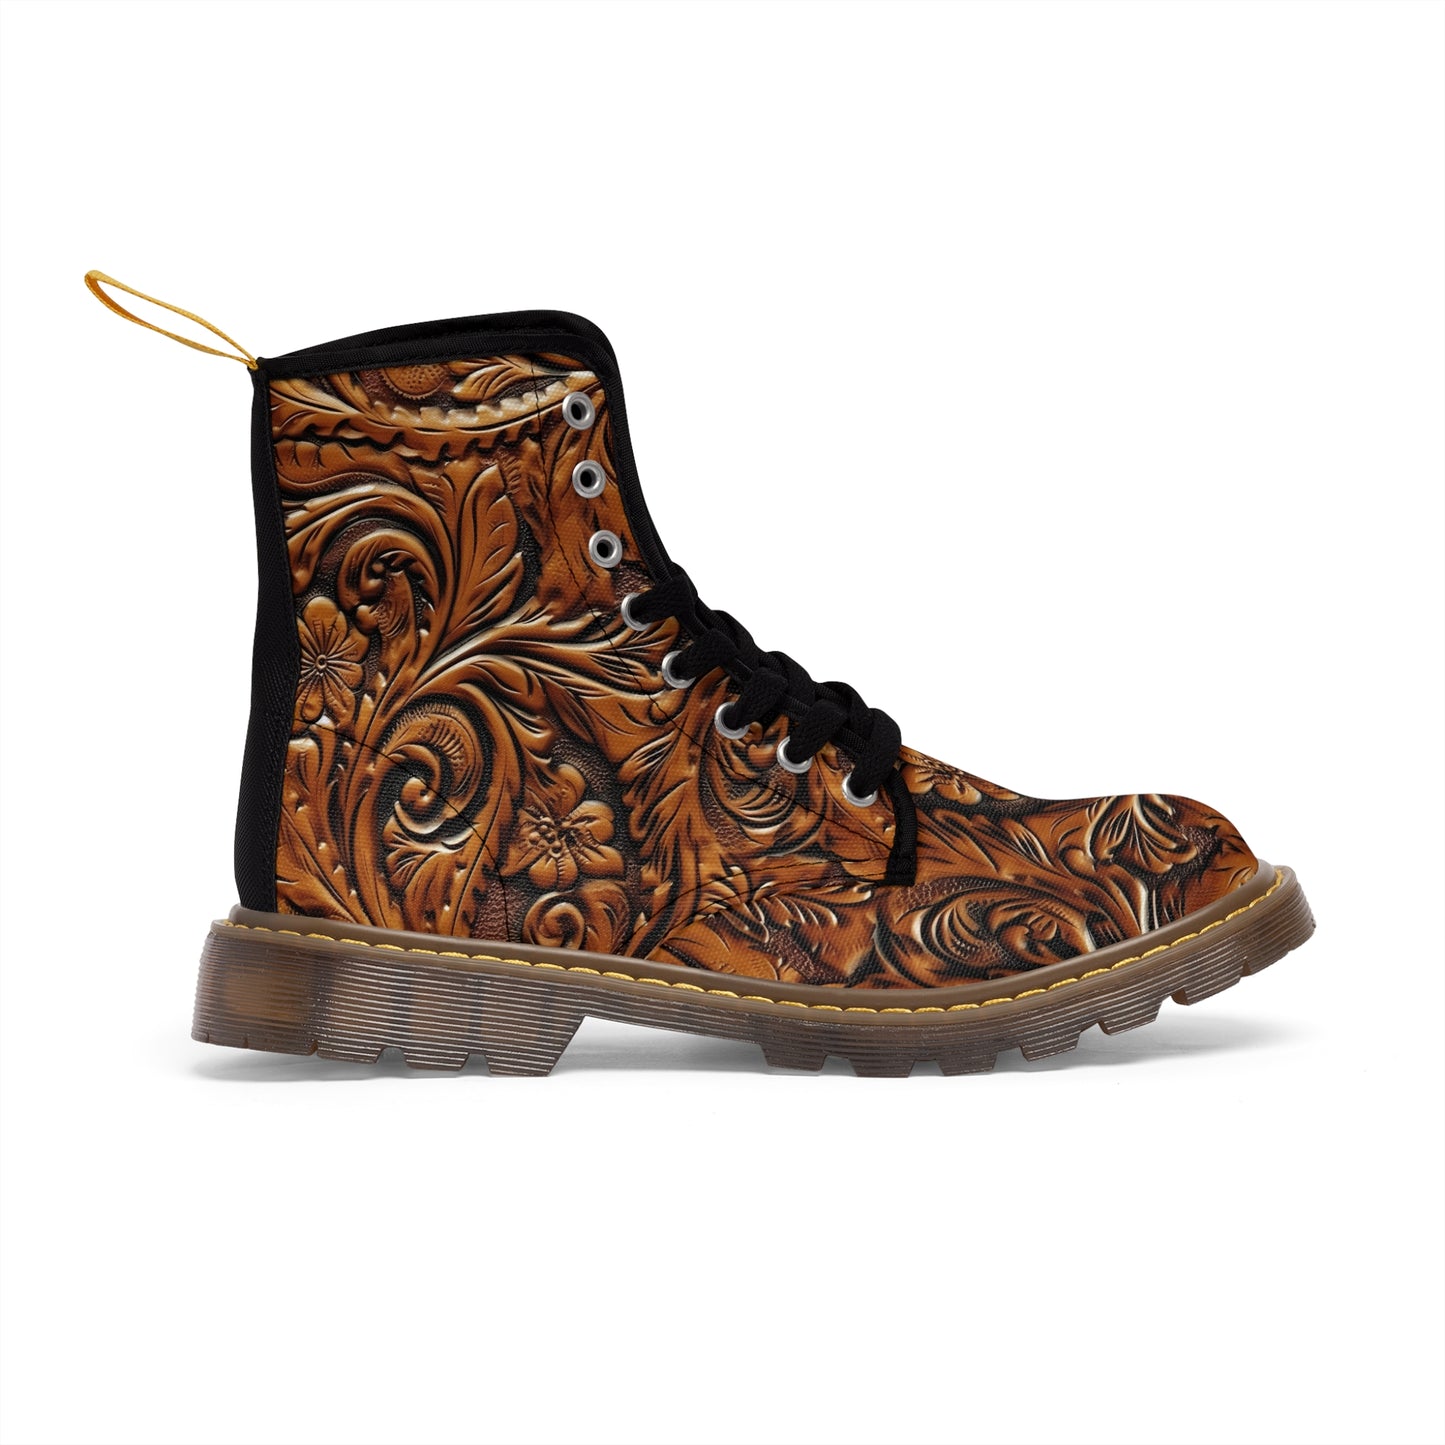 Tooled Leather Women's Canvas Boots (Brown) by Studio Ten Design